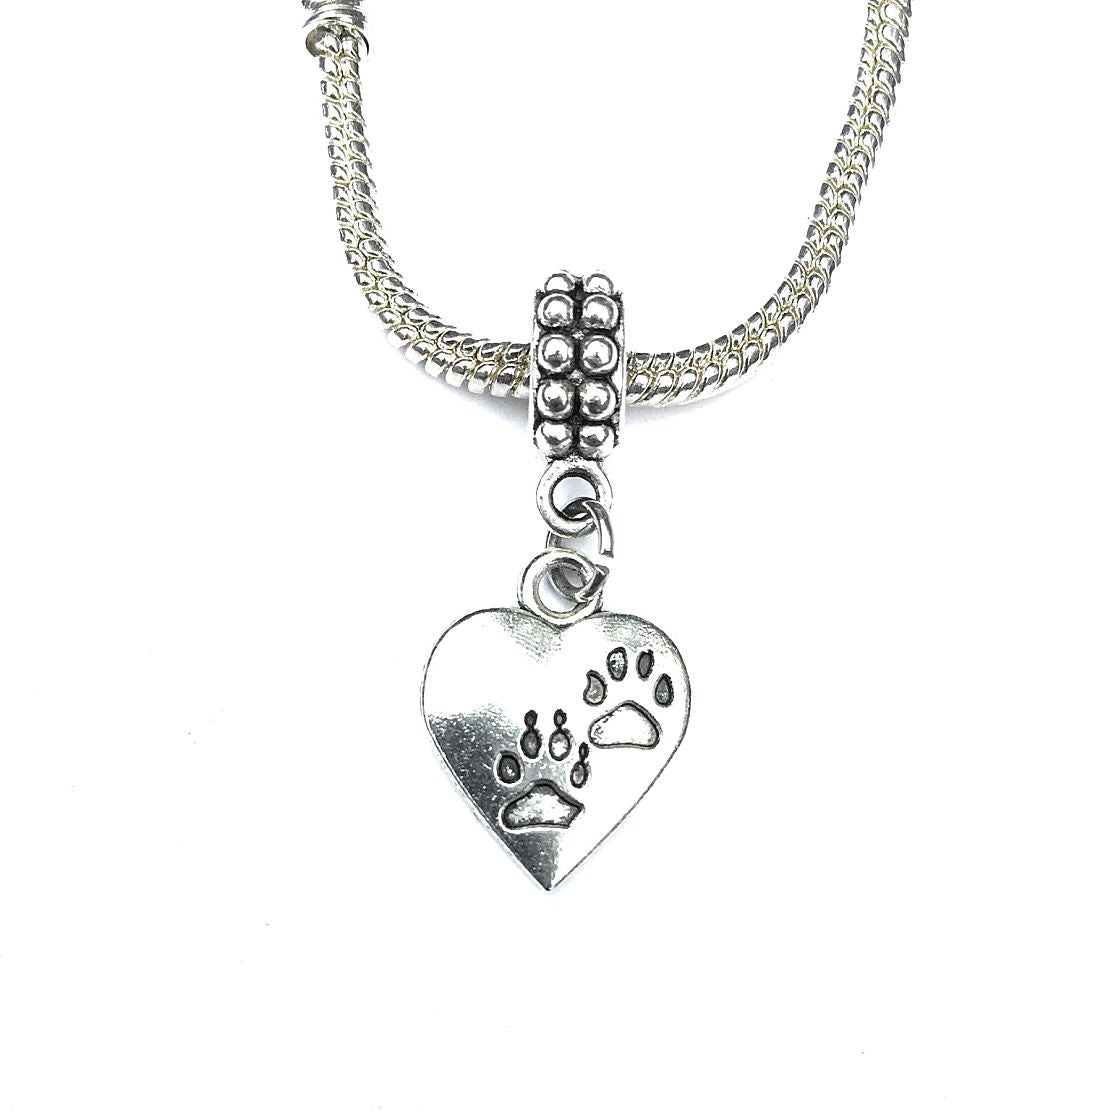 Silver Cat and Dog Paw Prints Charm Bead for Bracelet.